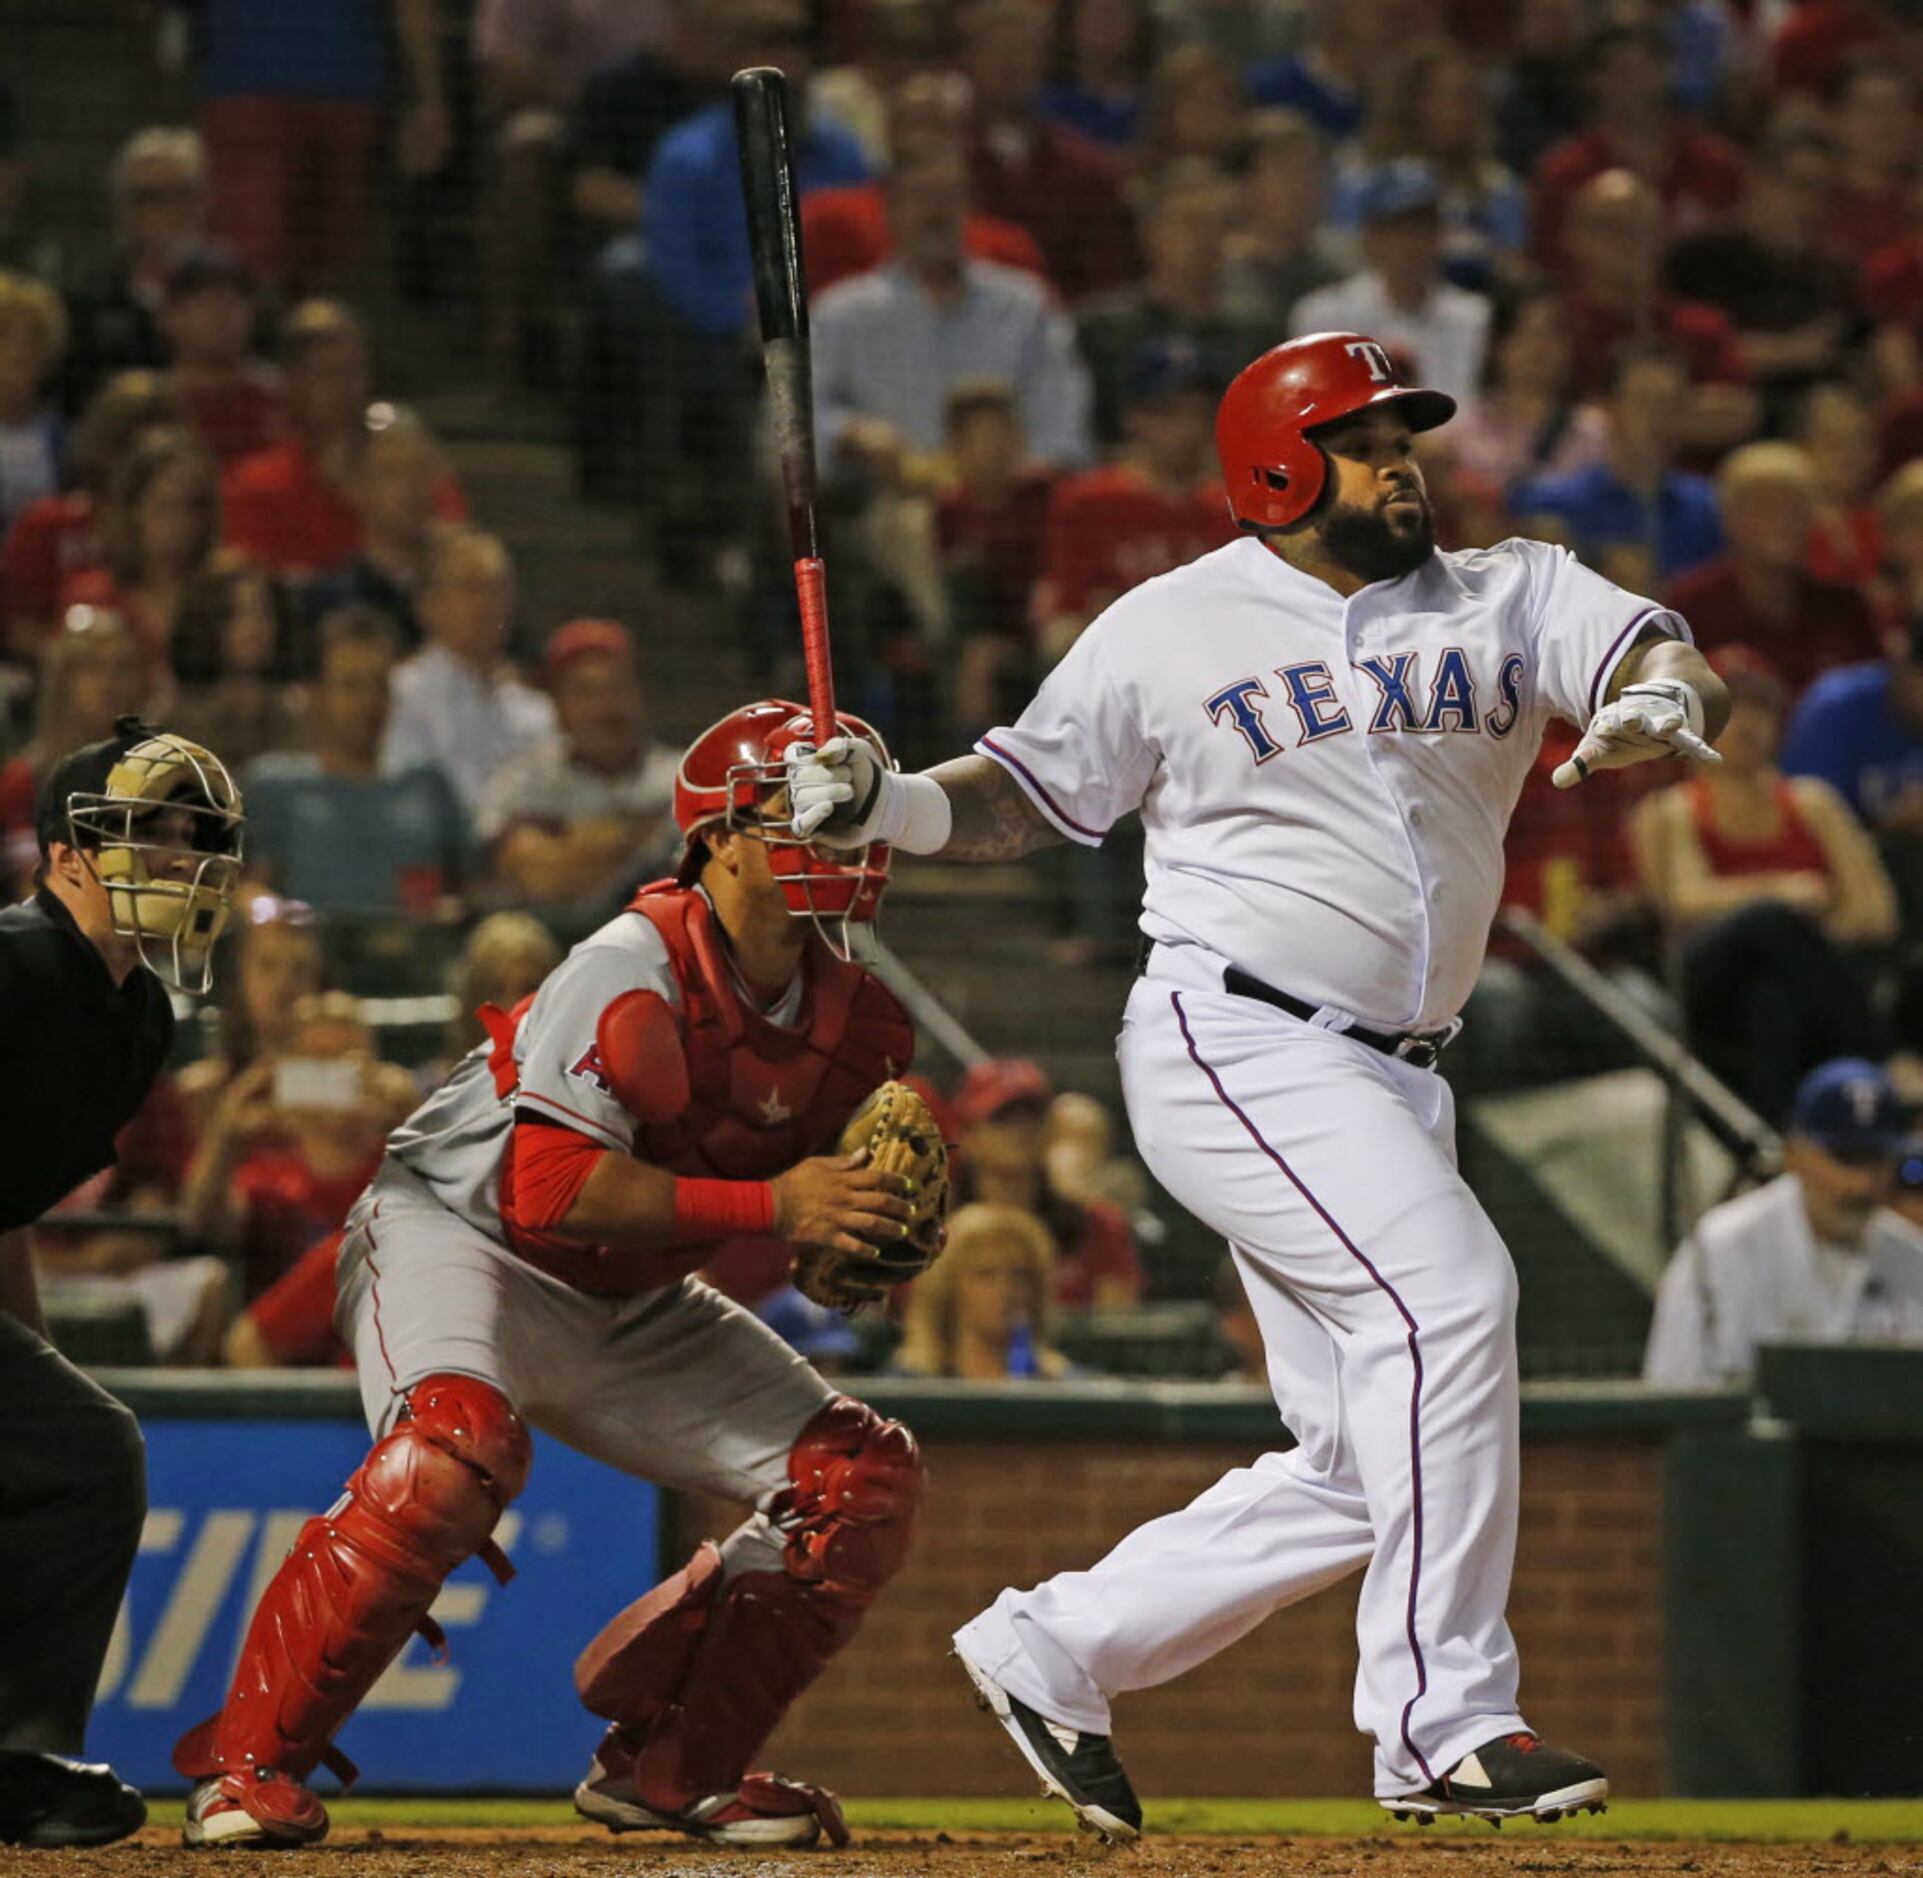 Prince Fielder wins Home Run Derby for second time